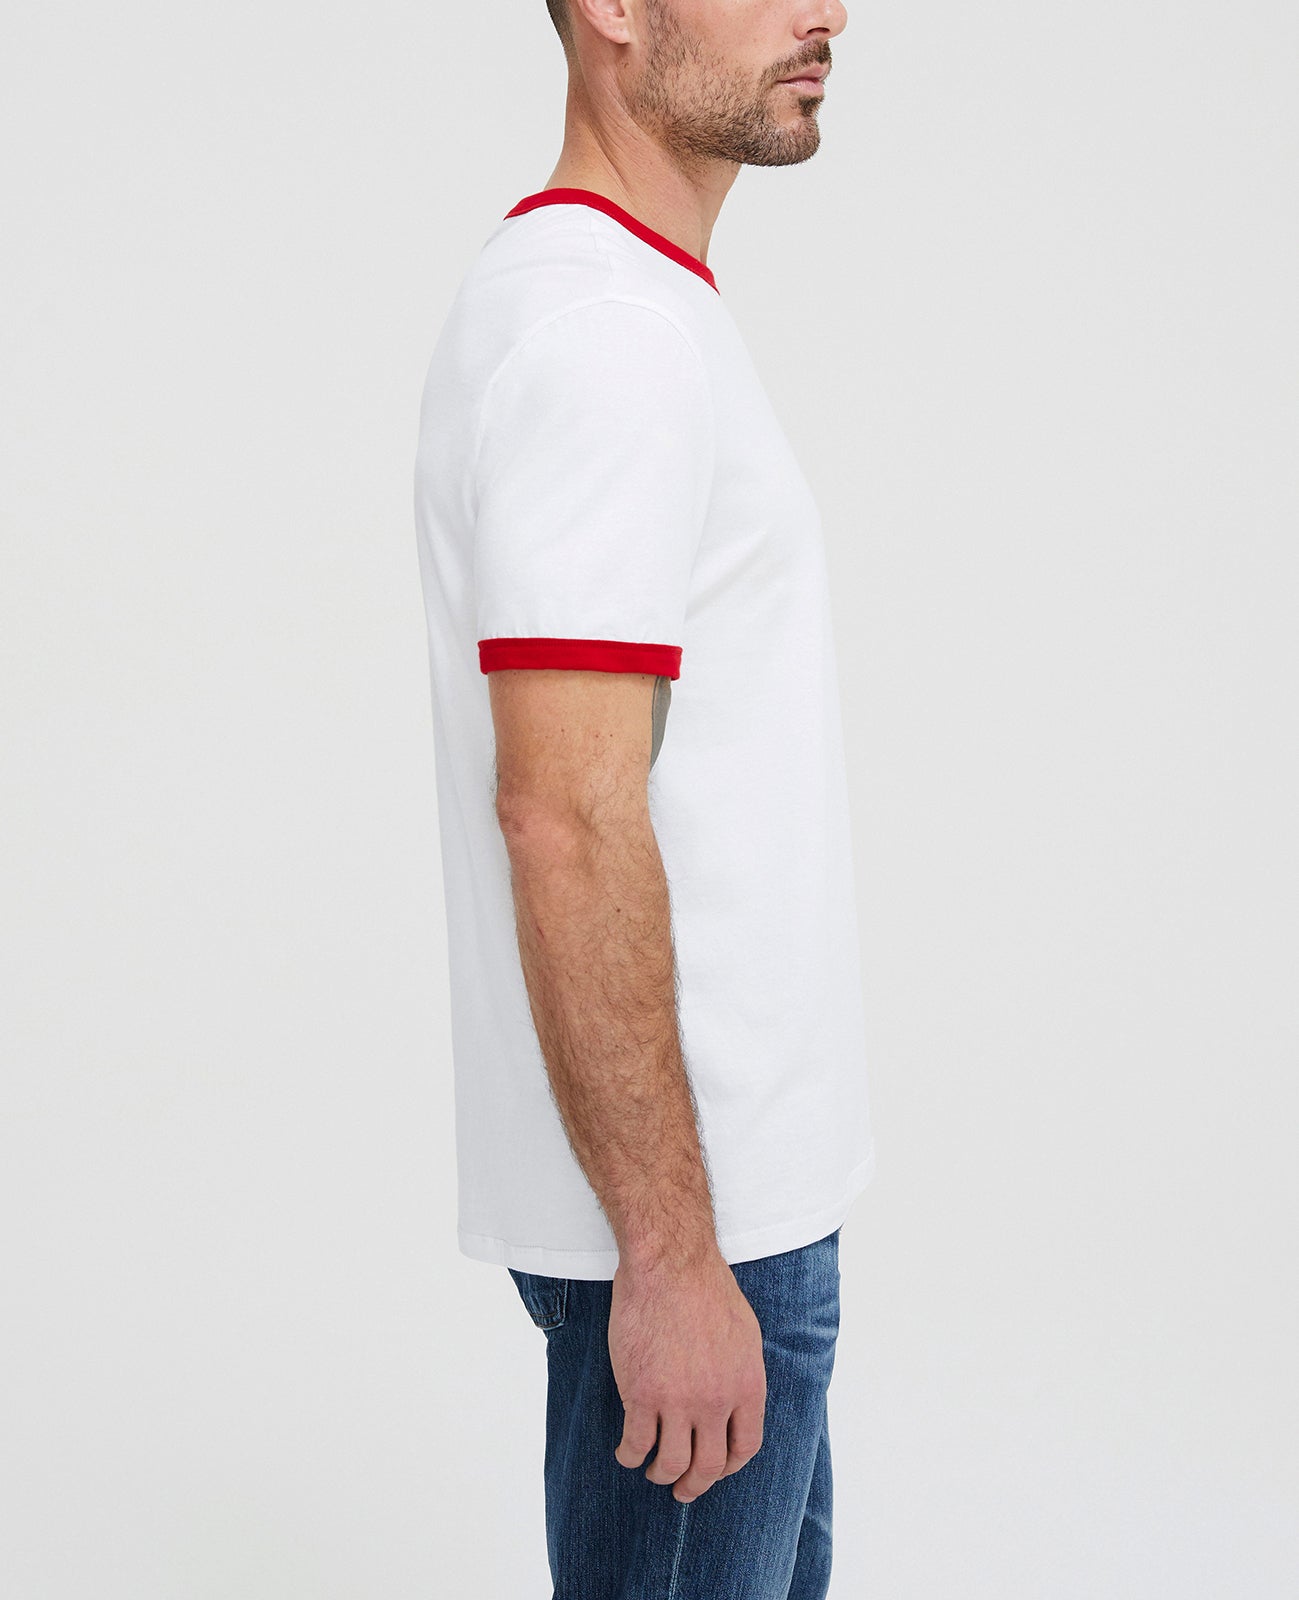 Anders Ringer Tee True White/Clever Red Short Sleeve Tee Men Tops Photo 2